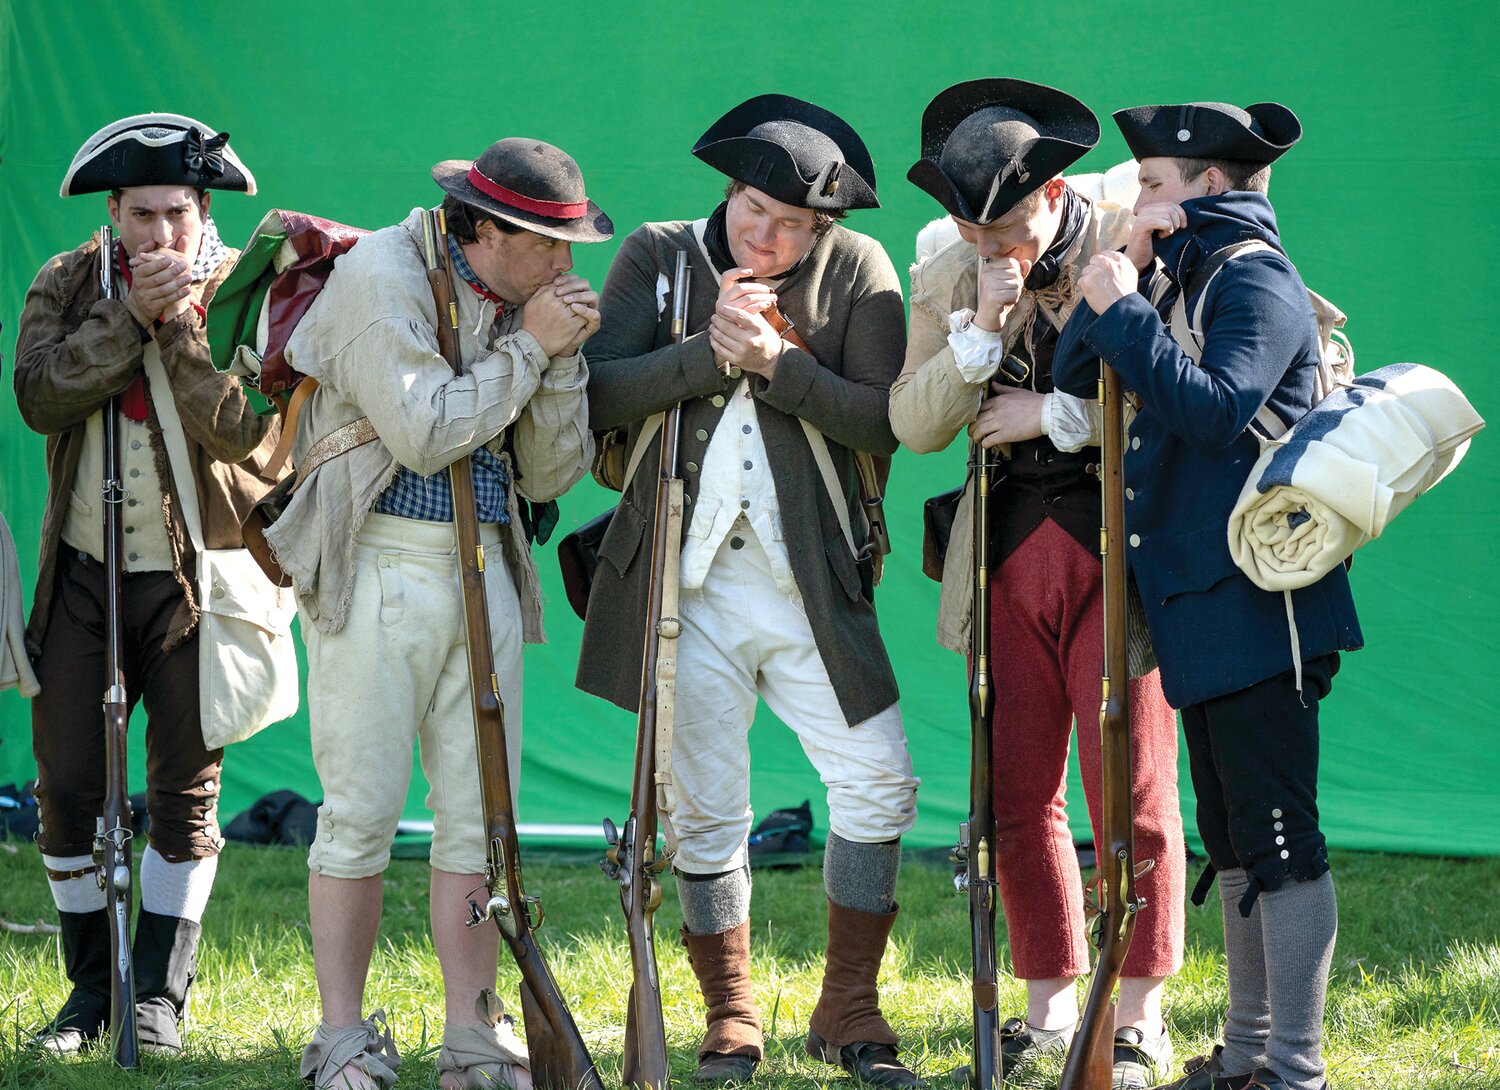 Actors try to look cold while filming a winter scene in front of a green screen on a mild mid-April afternoon at Washington Crossing Historic Park.